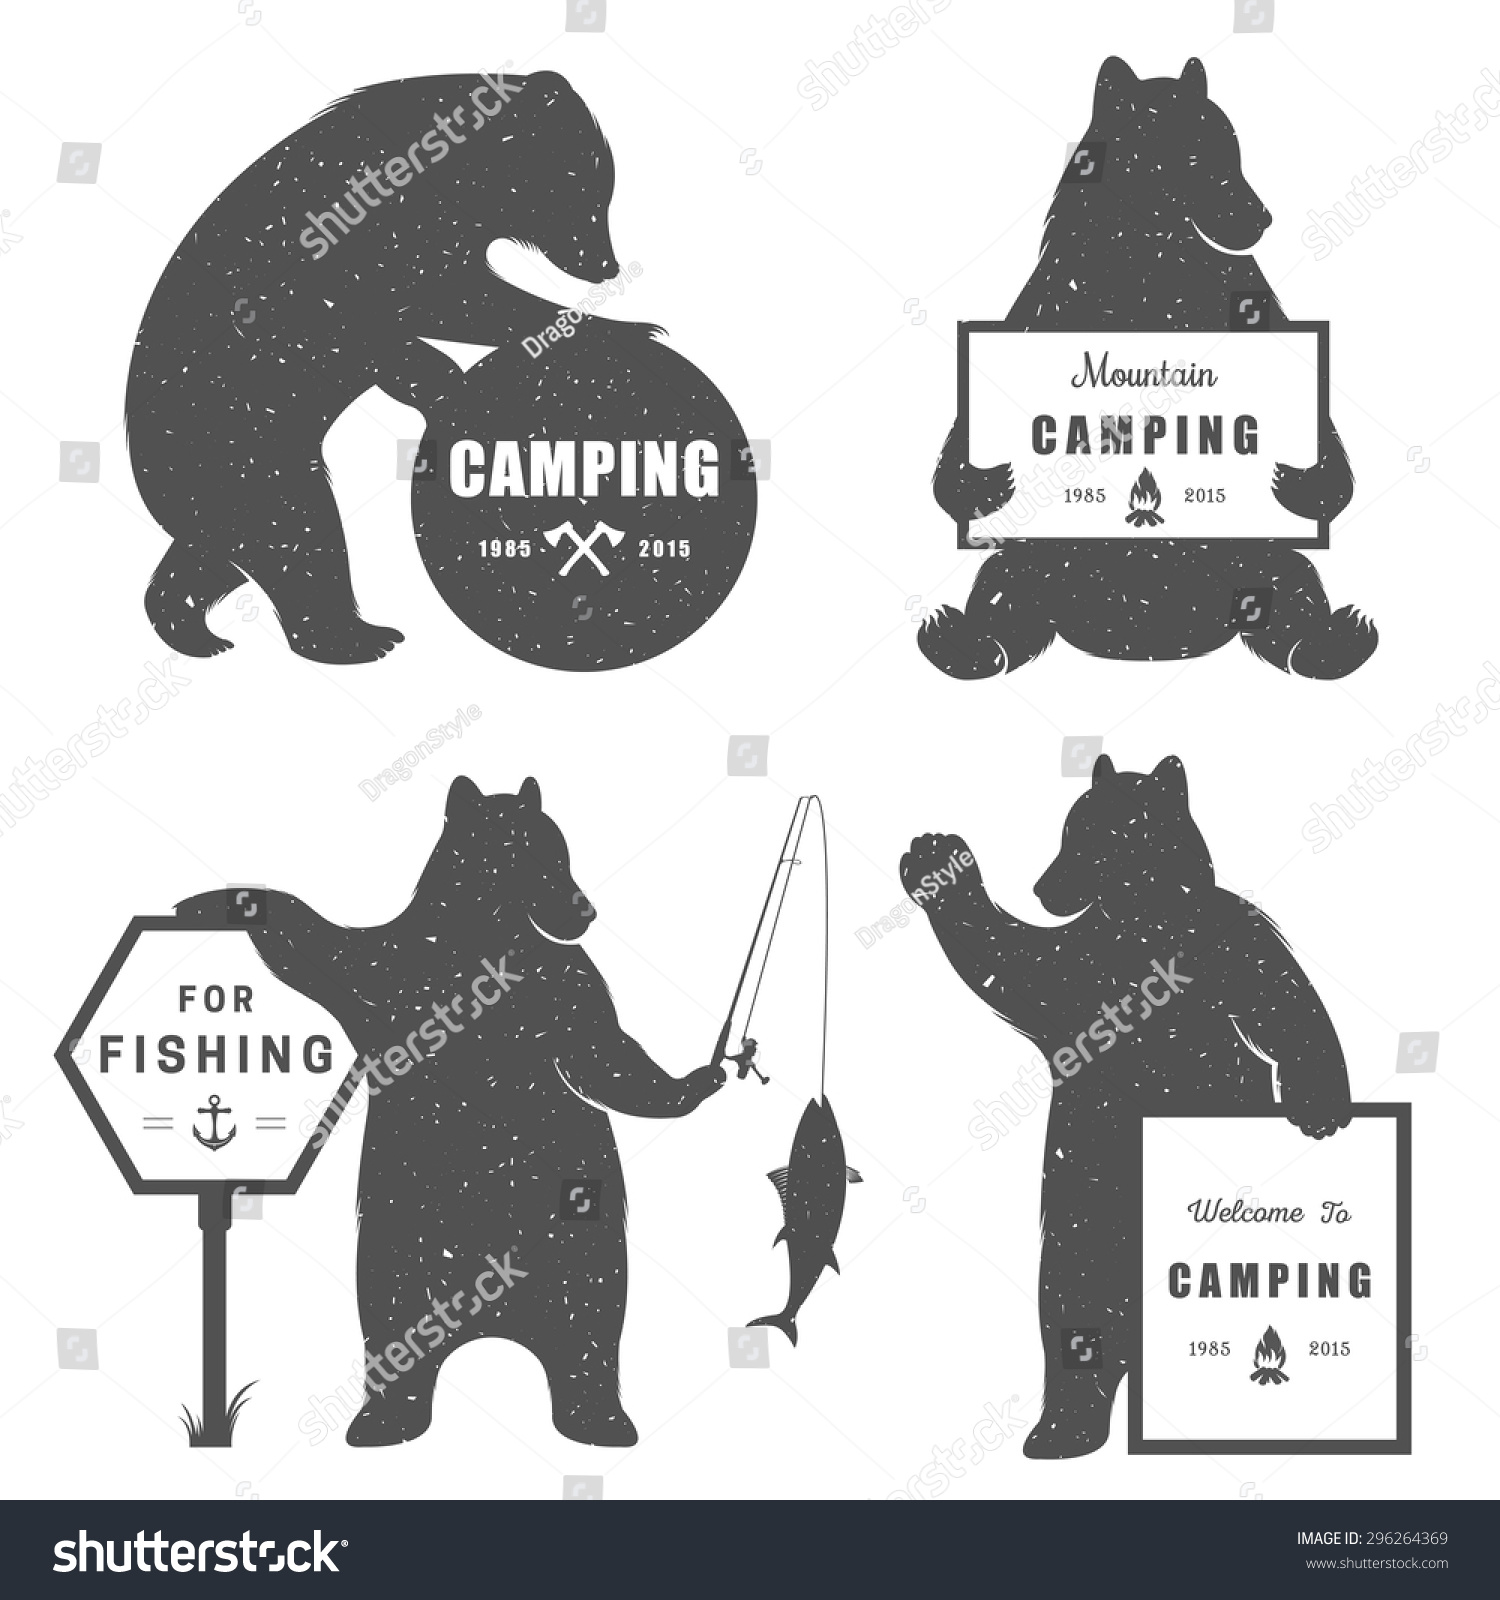 SVG of Vintage Illustration bear with sign camping - Grunge effect. Funny Bear with symbol Camp and For Fishing isolated on white background for posters, camp clubs and Web emblems svg